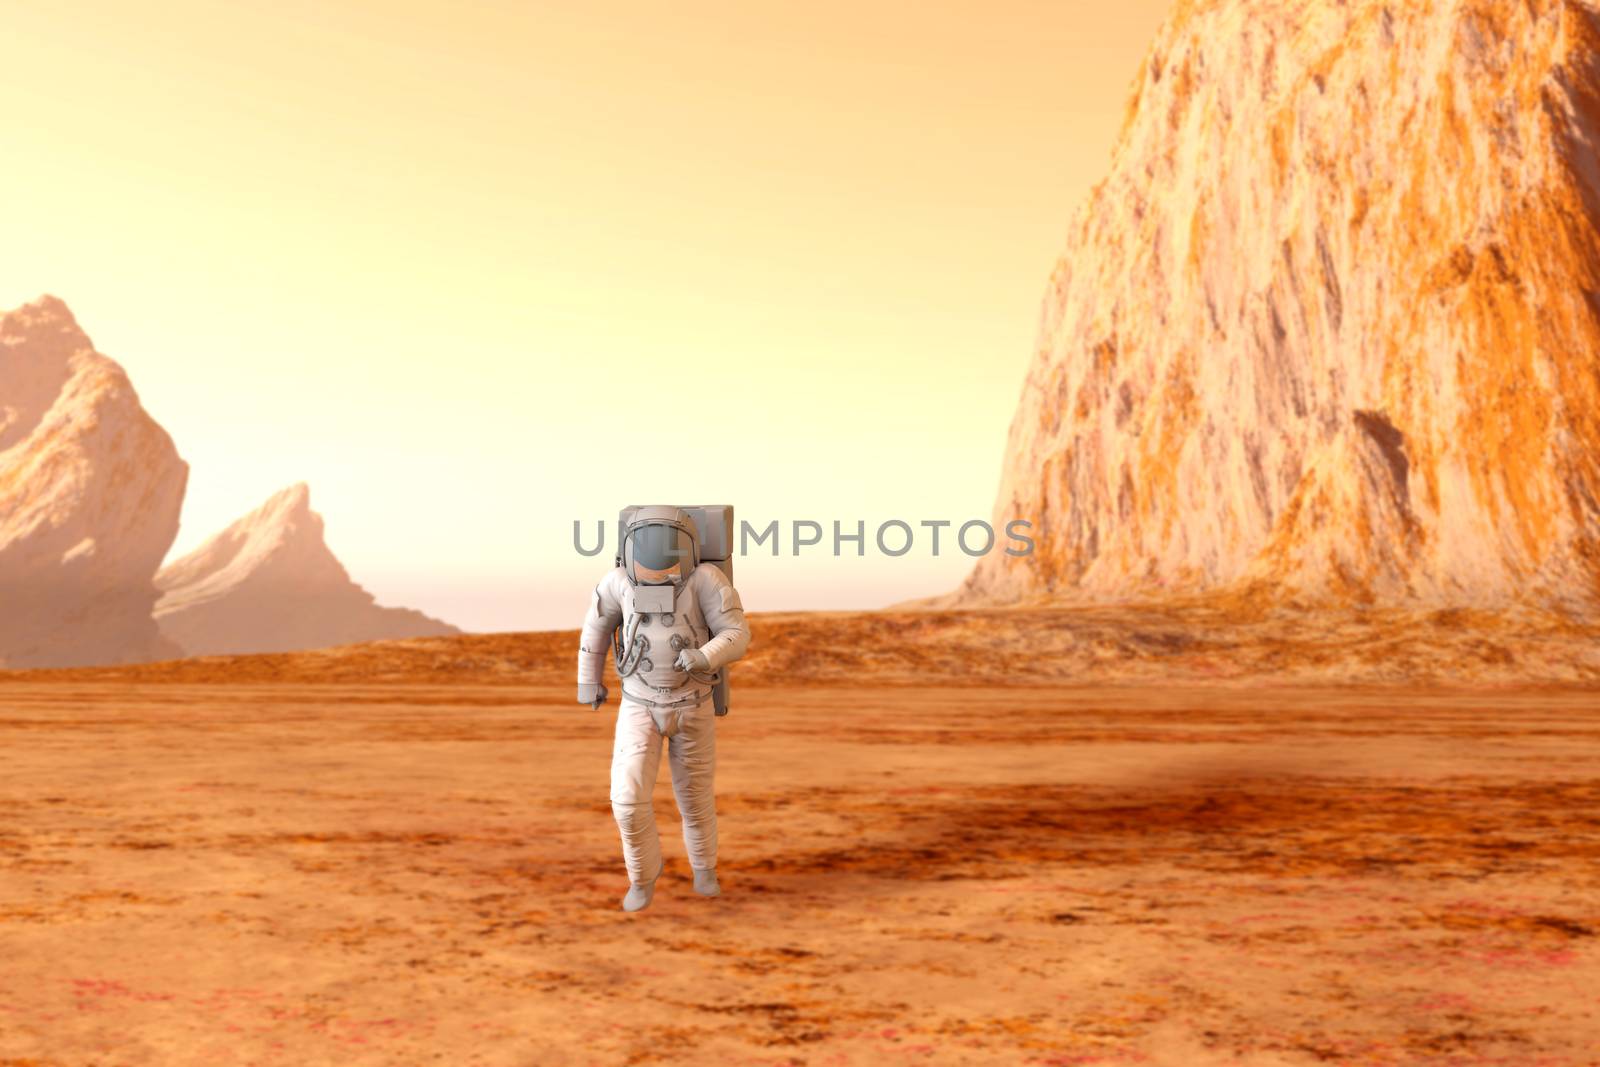 A Astronaut walking on the surface of Mars. 3D illustration.